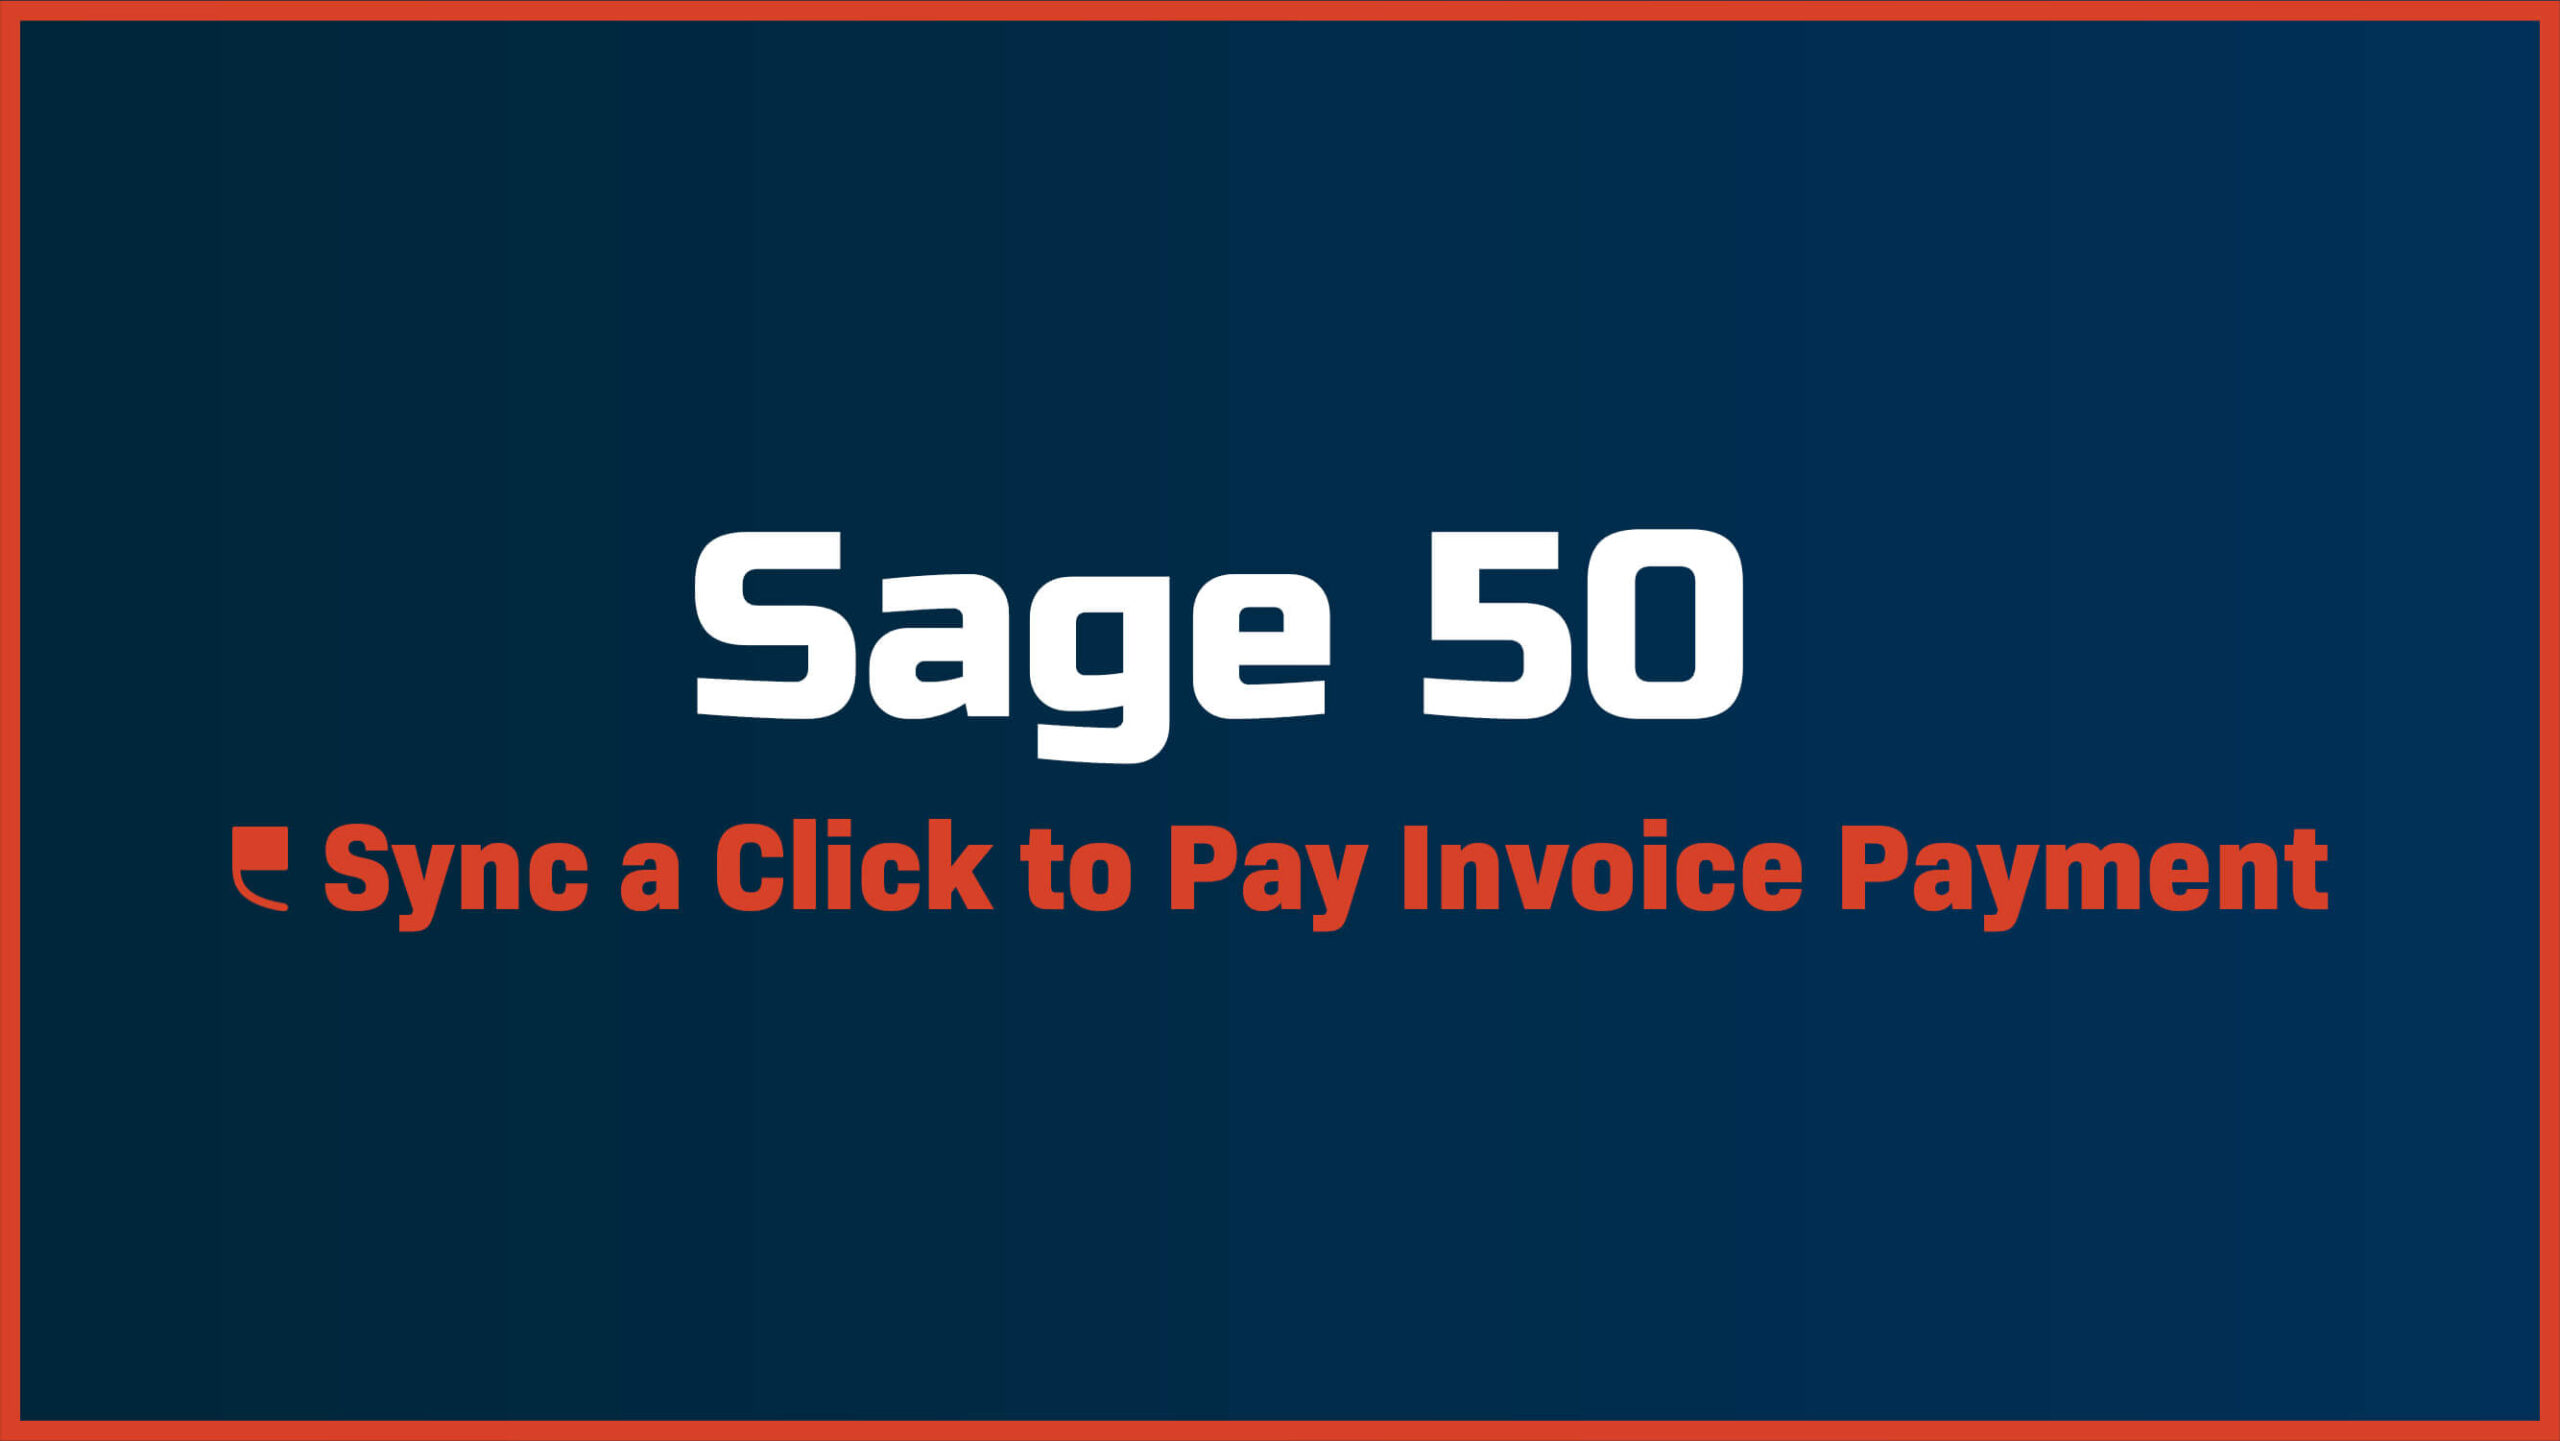 How to Sync a ‘Click to Pay’ Invoice Payment to Fortis Sage 50 Payments - Featured Image